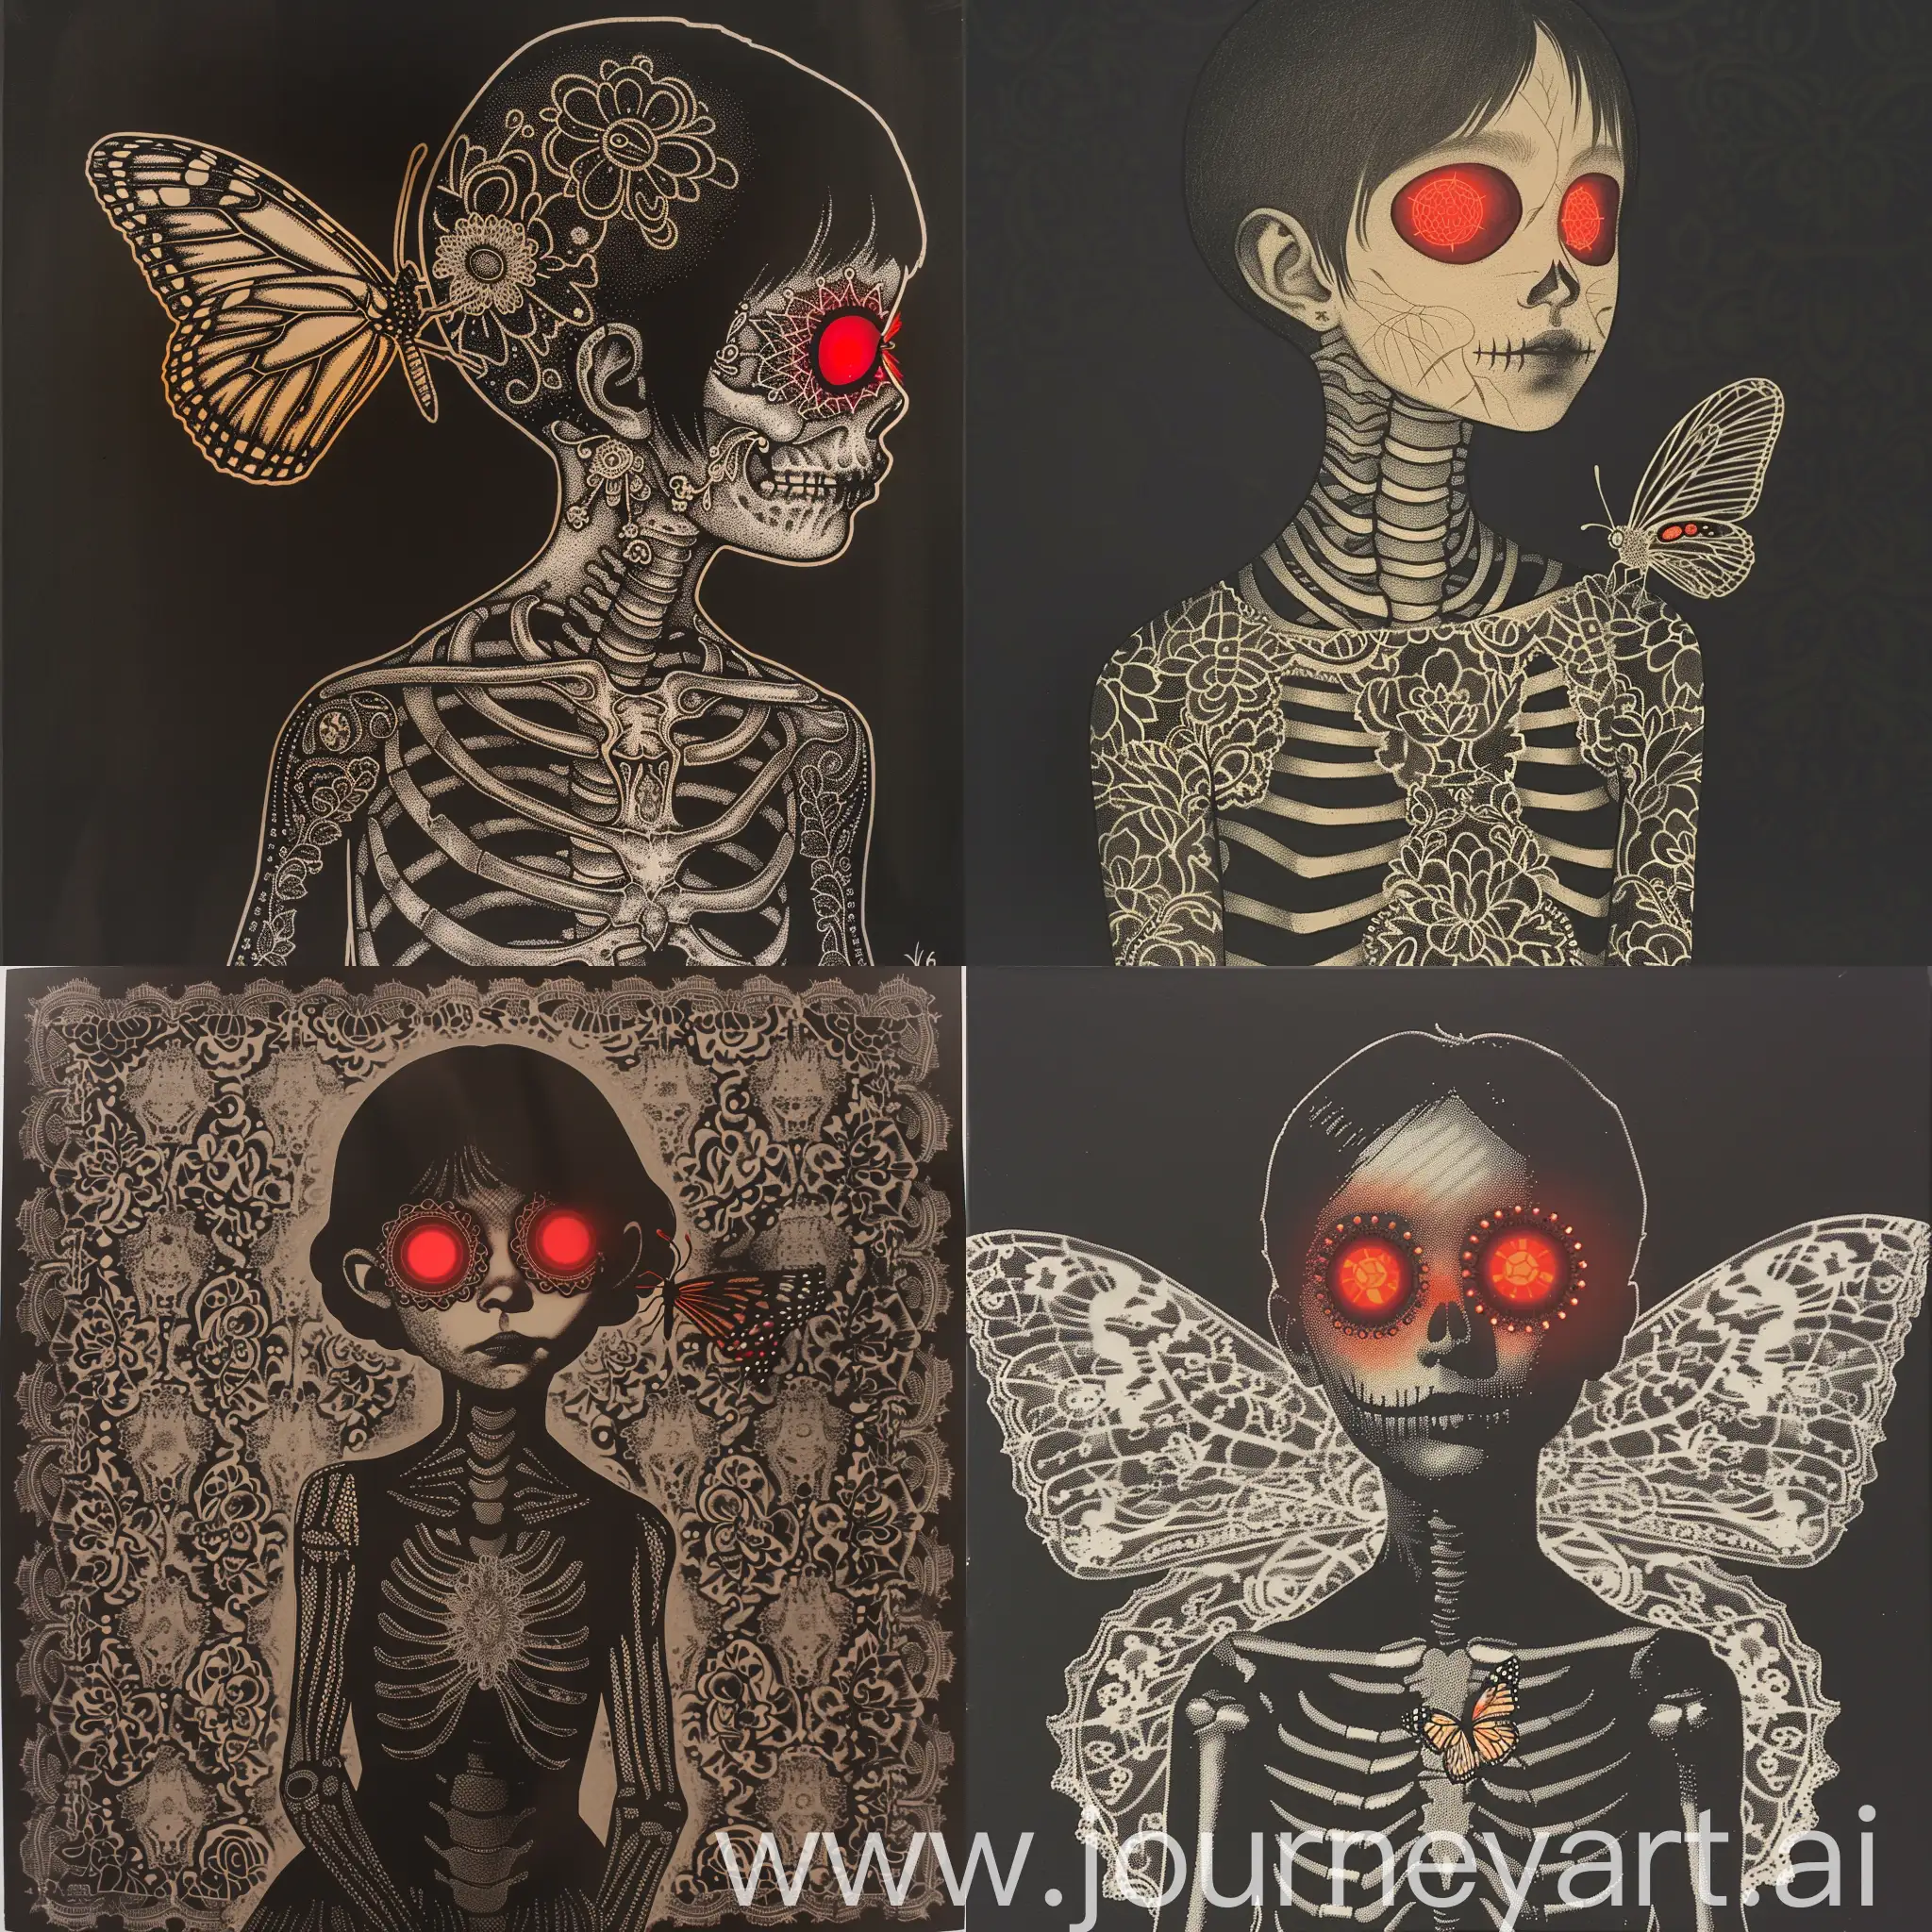 Mesmerizing-Skeleton-Girl-with-Fiery-Red-Eyes-and-Intricate-Lace-Pattern-Adorned-with-Diamonds-and-a-Bright-Butterfly